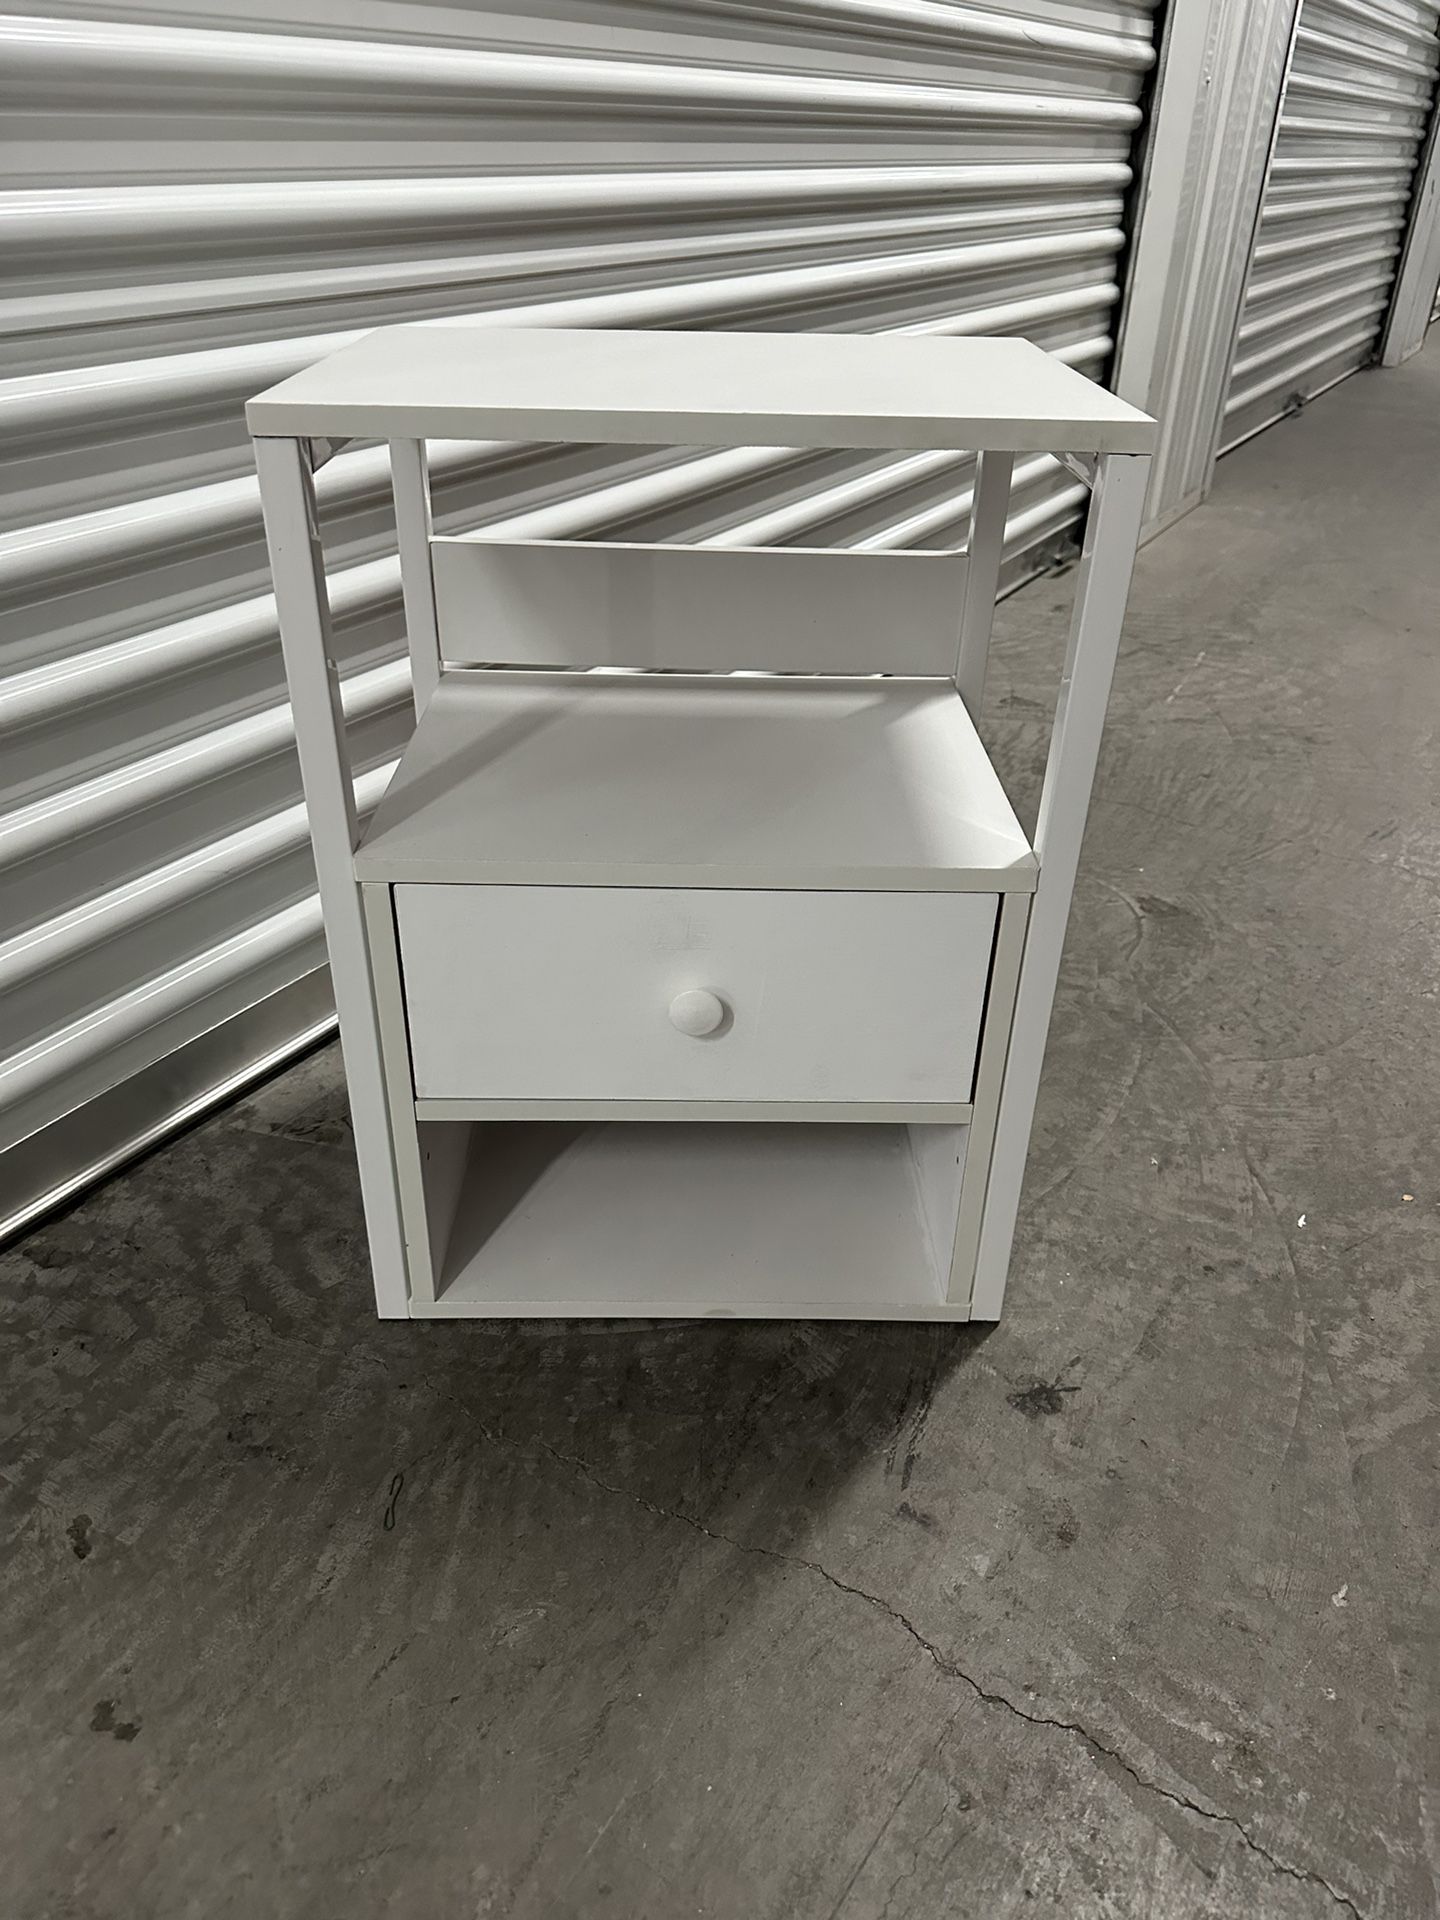 Small Bedside Table For Kids Room 3 Tier For Storage One Drawer